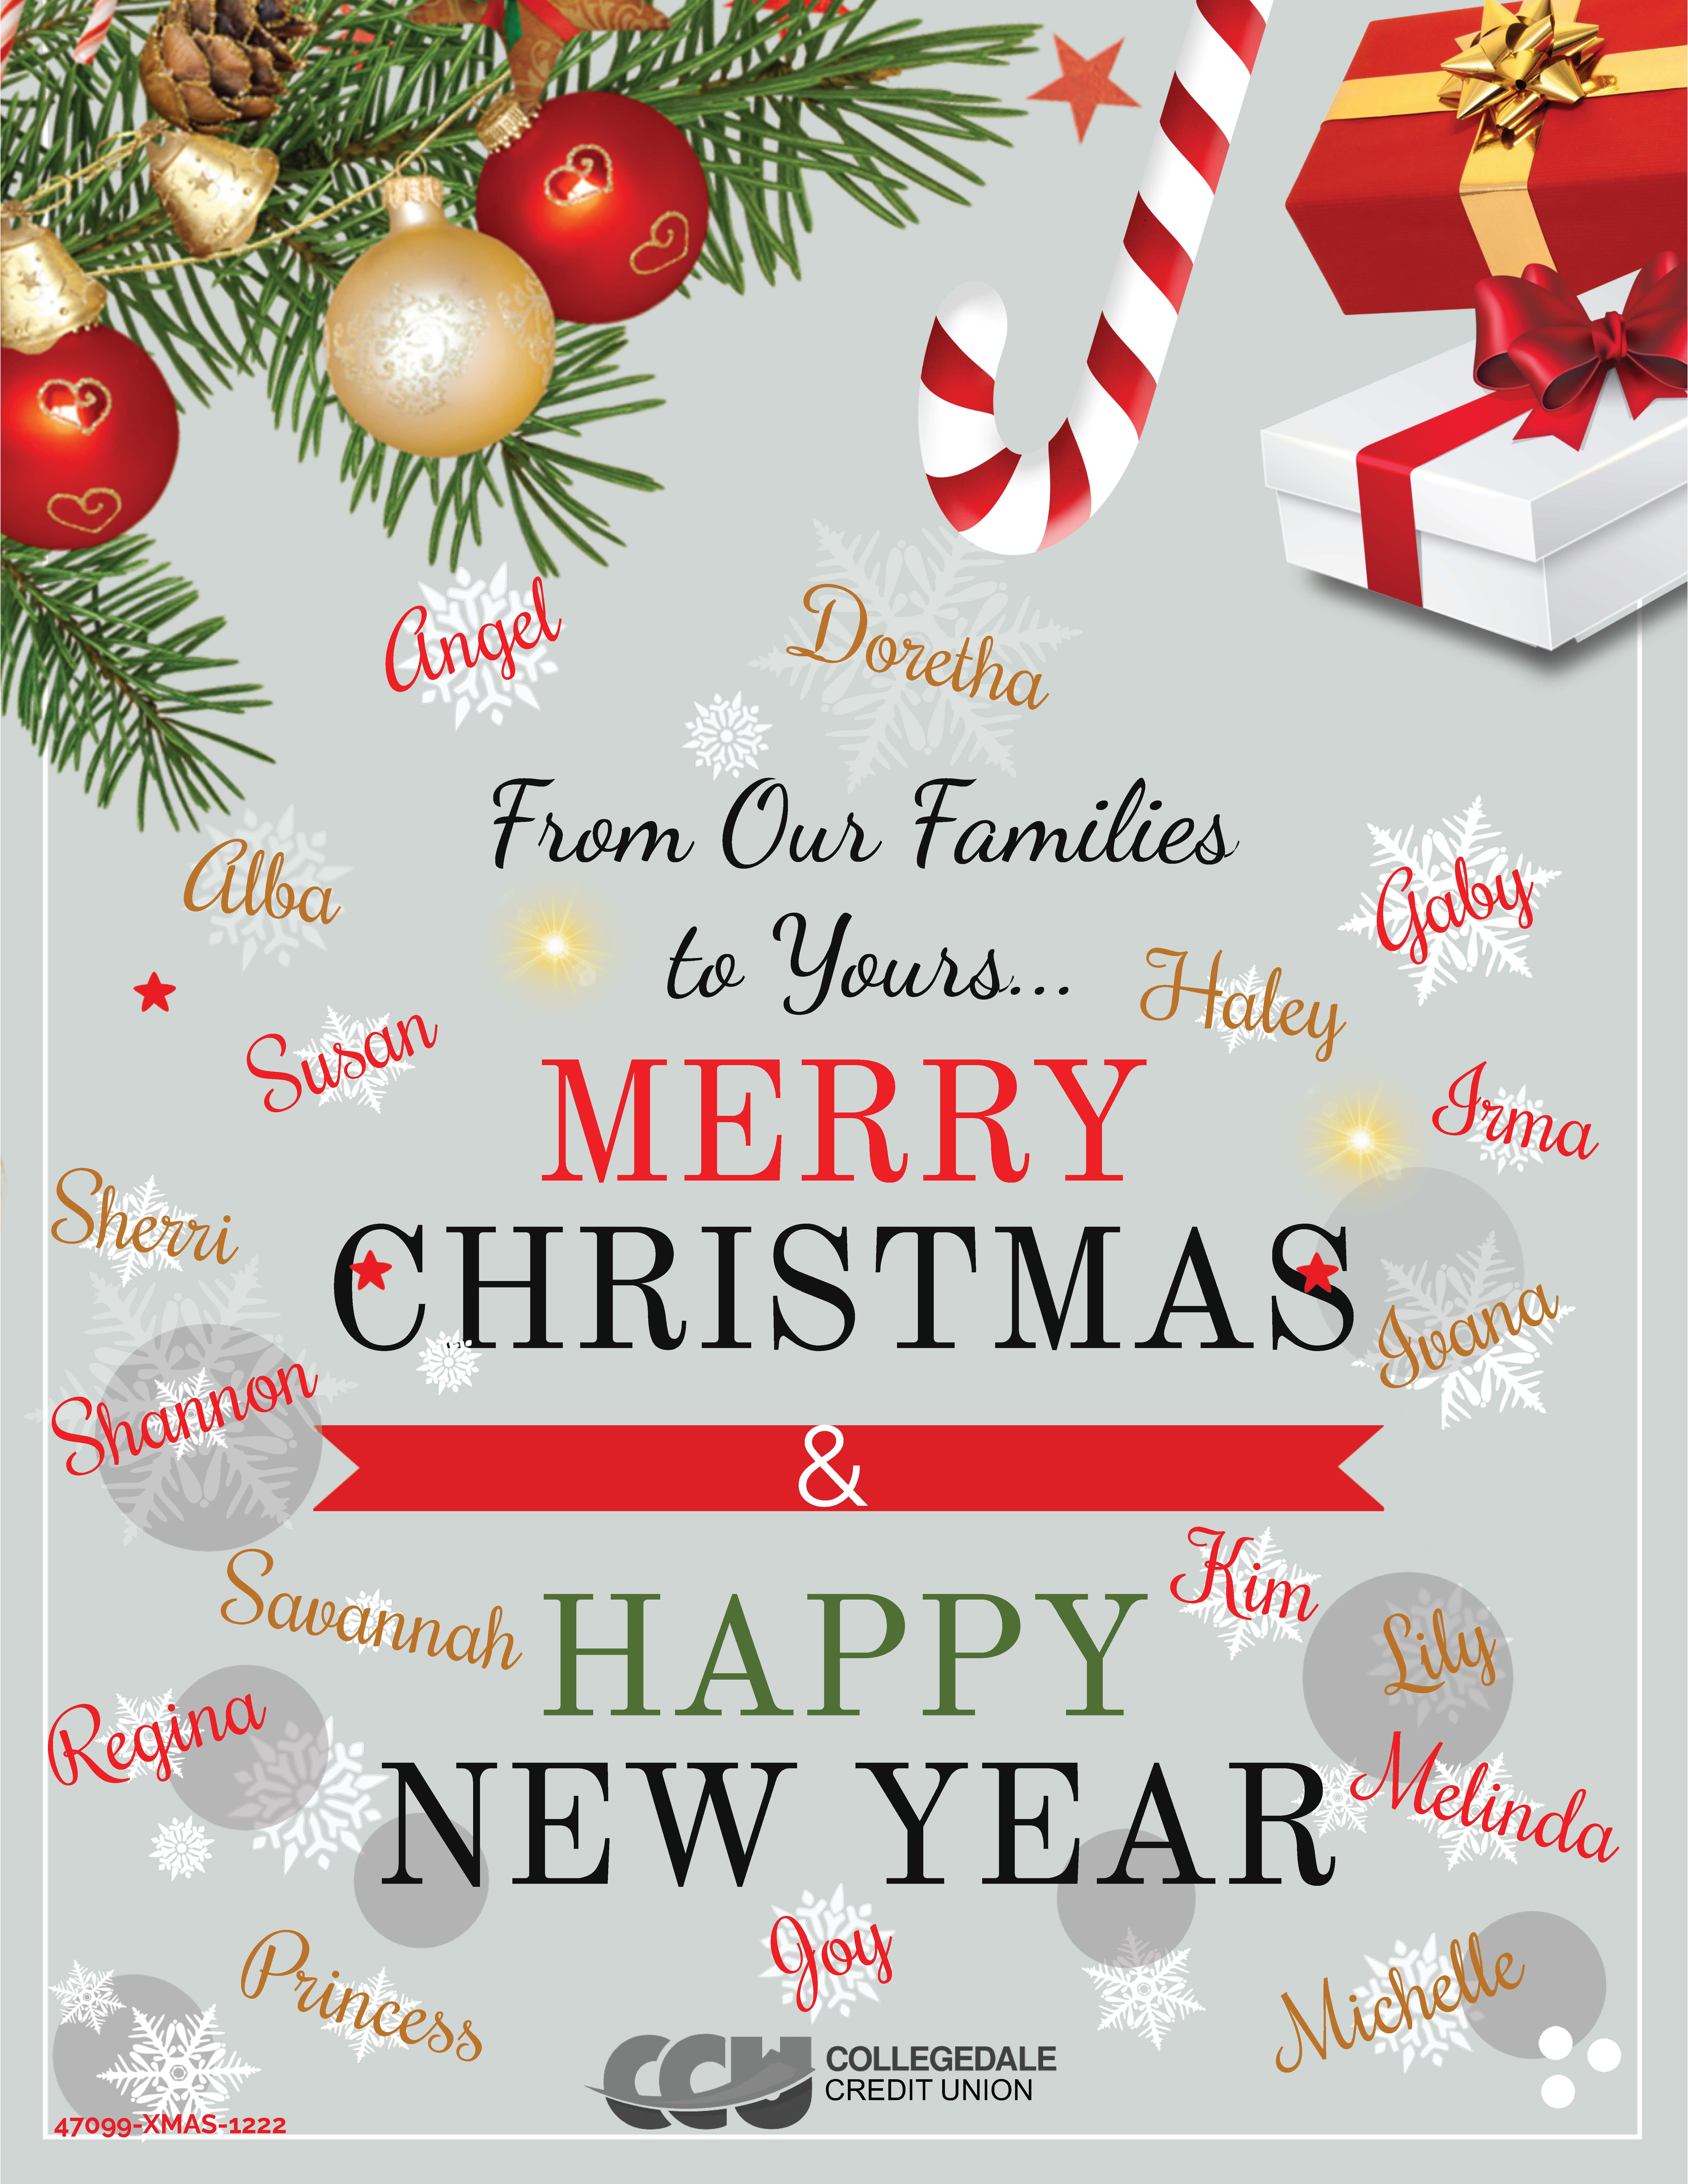 From Our Families to Yours... Merry Christmas and Happy New Year 